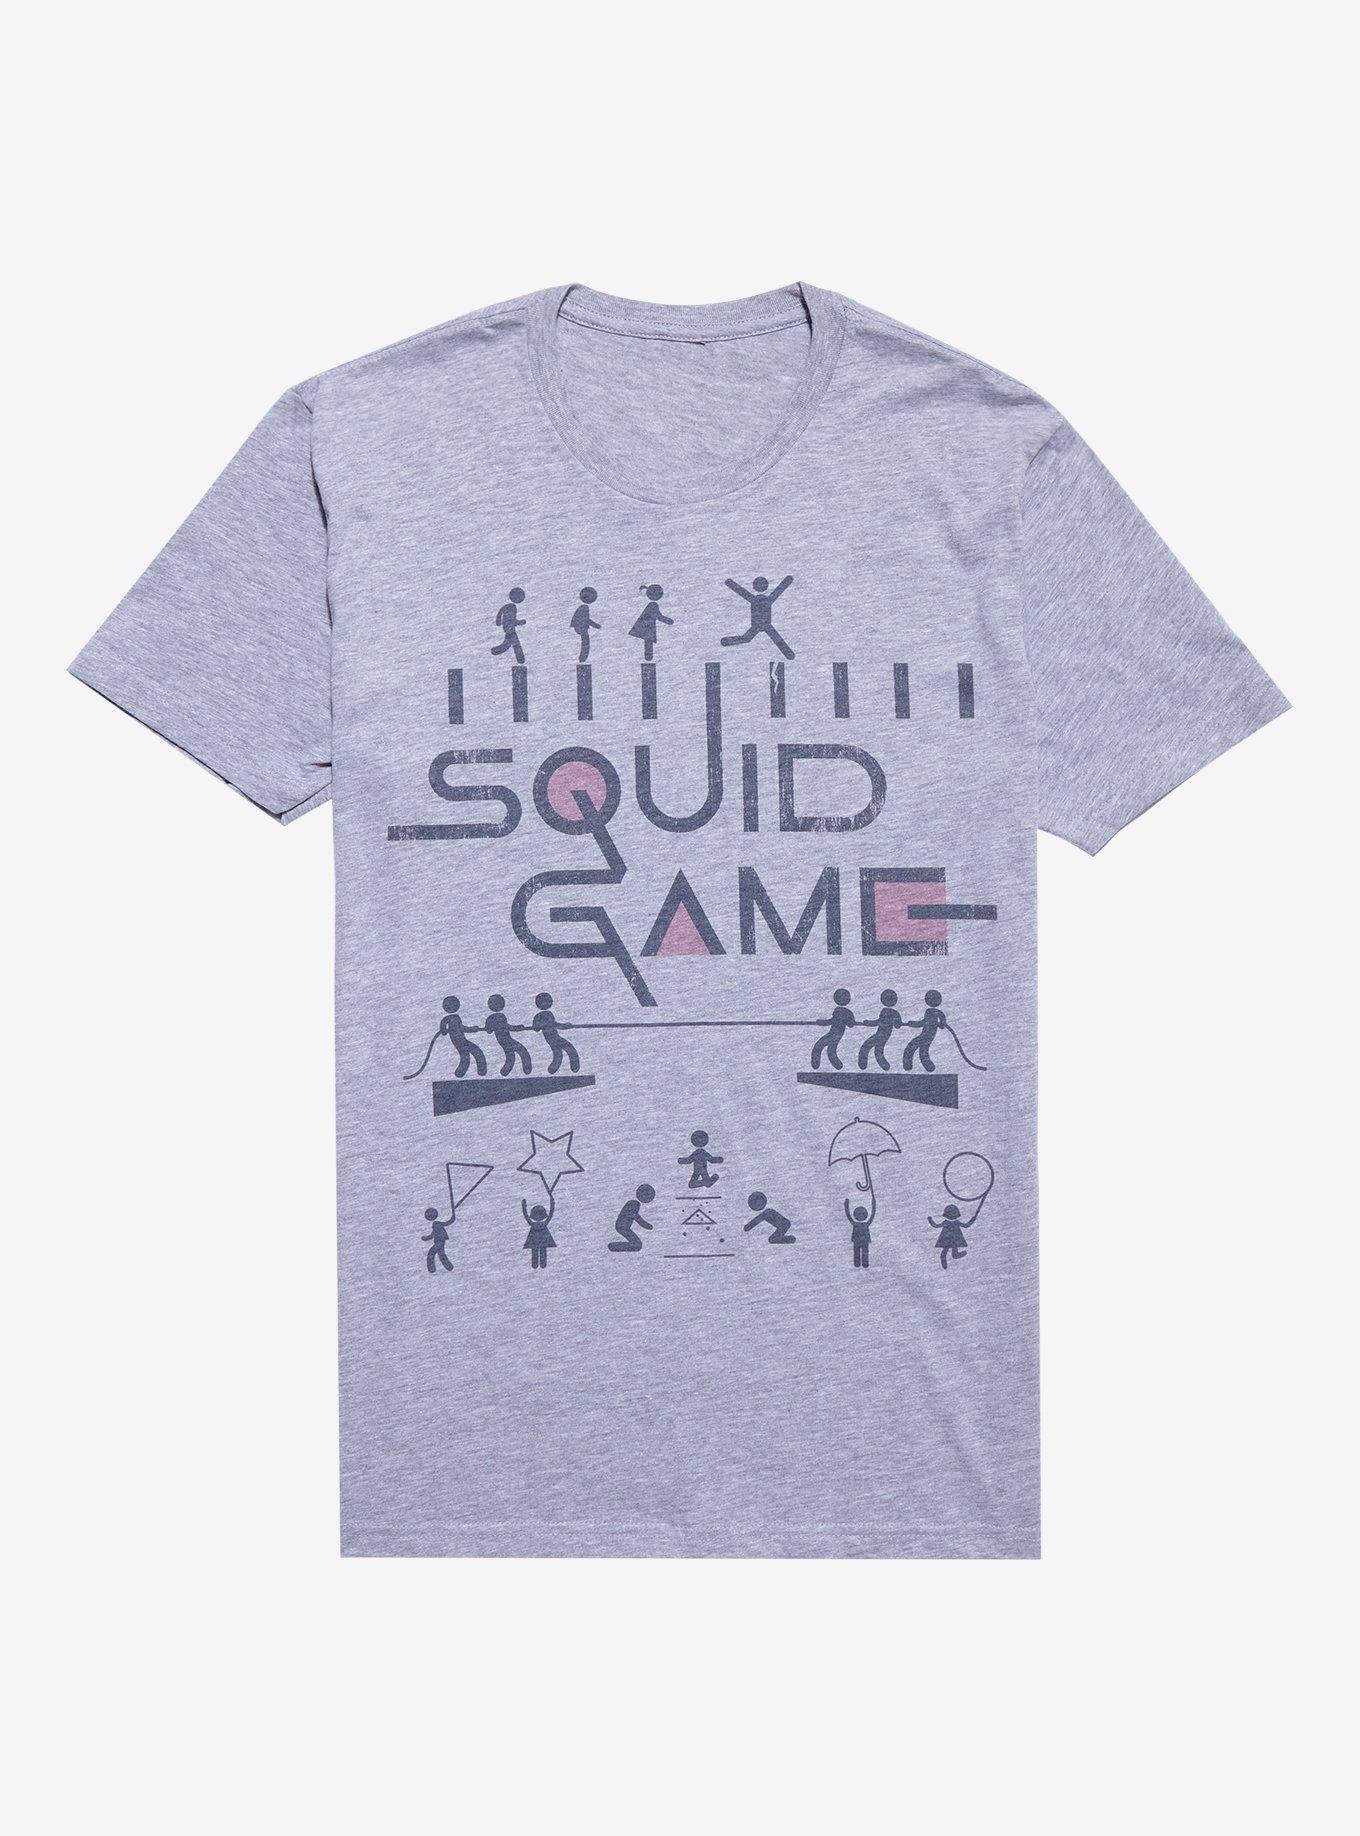 Squid Game Icons T-Shirt, GREY HEATHER, hi-res